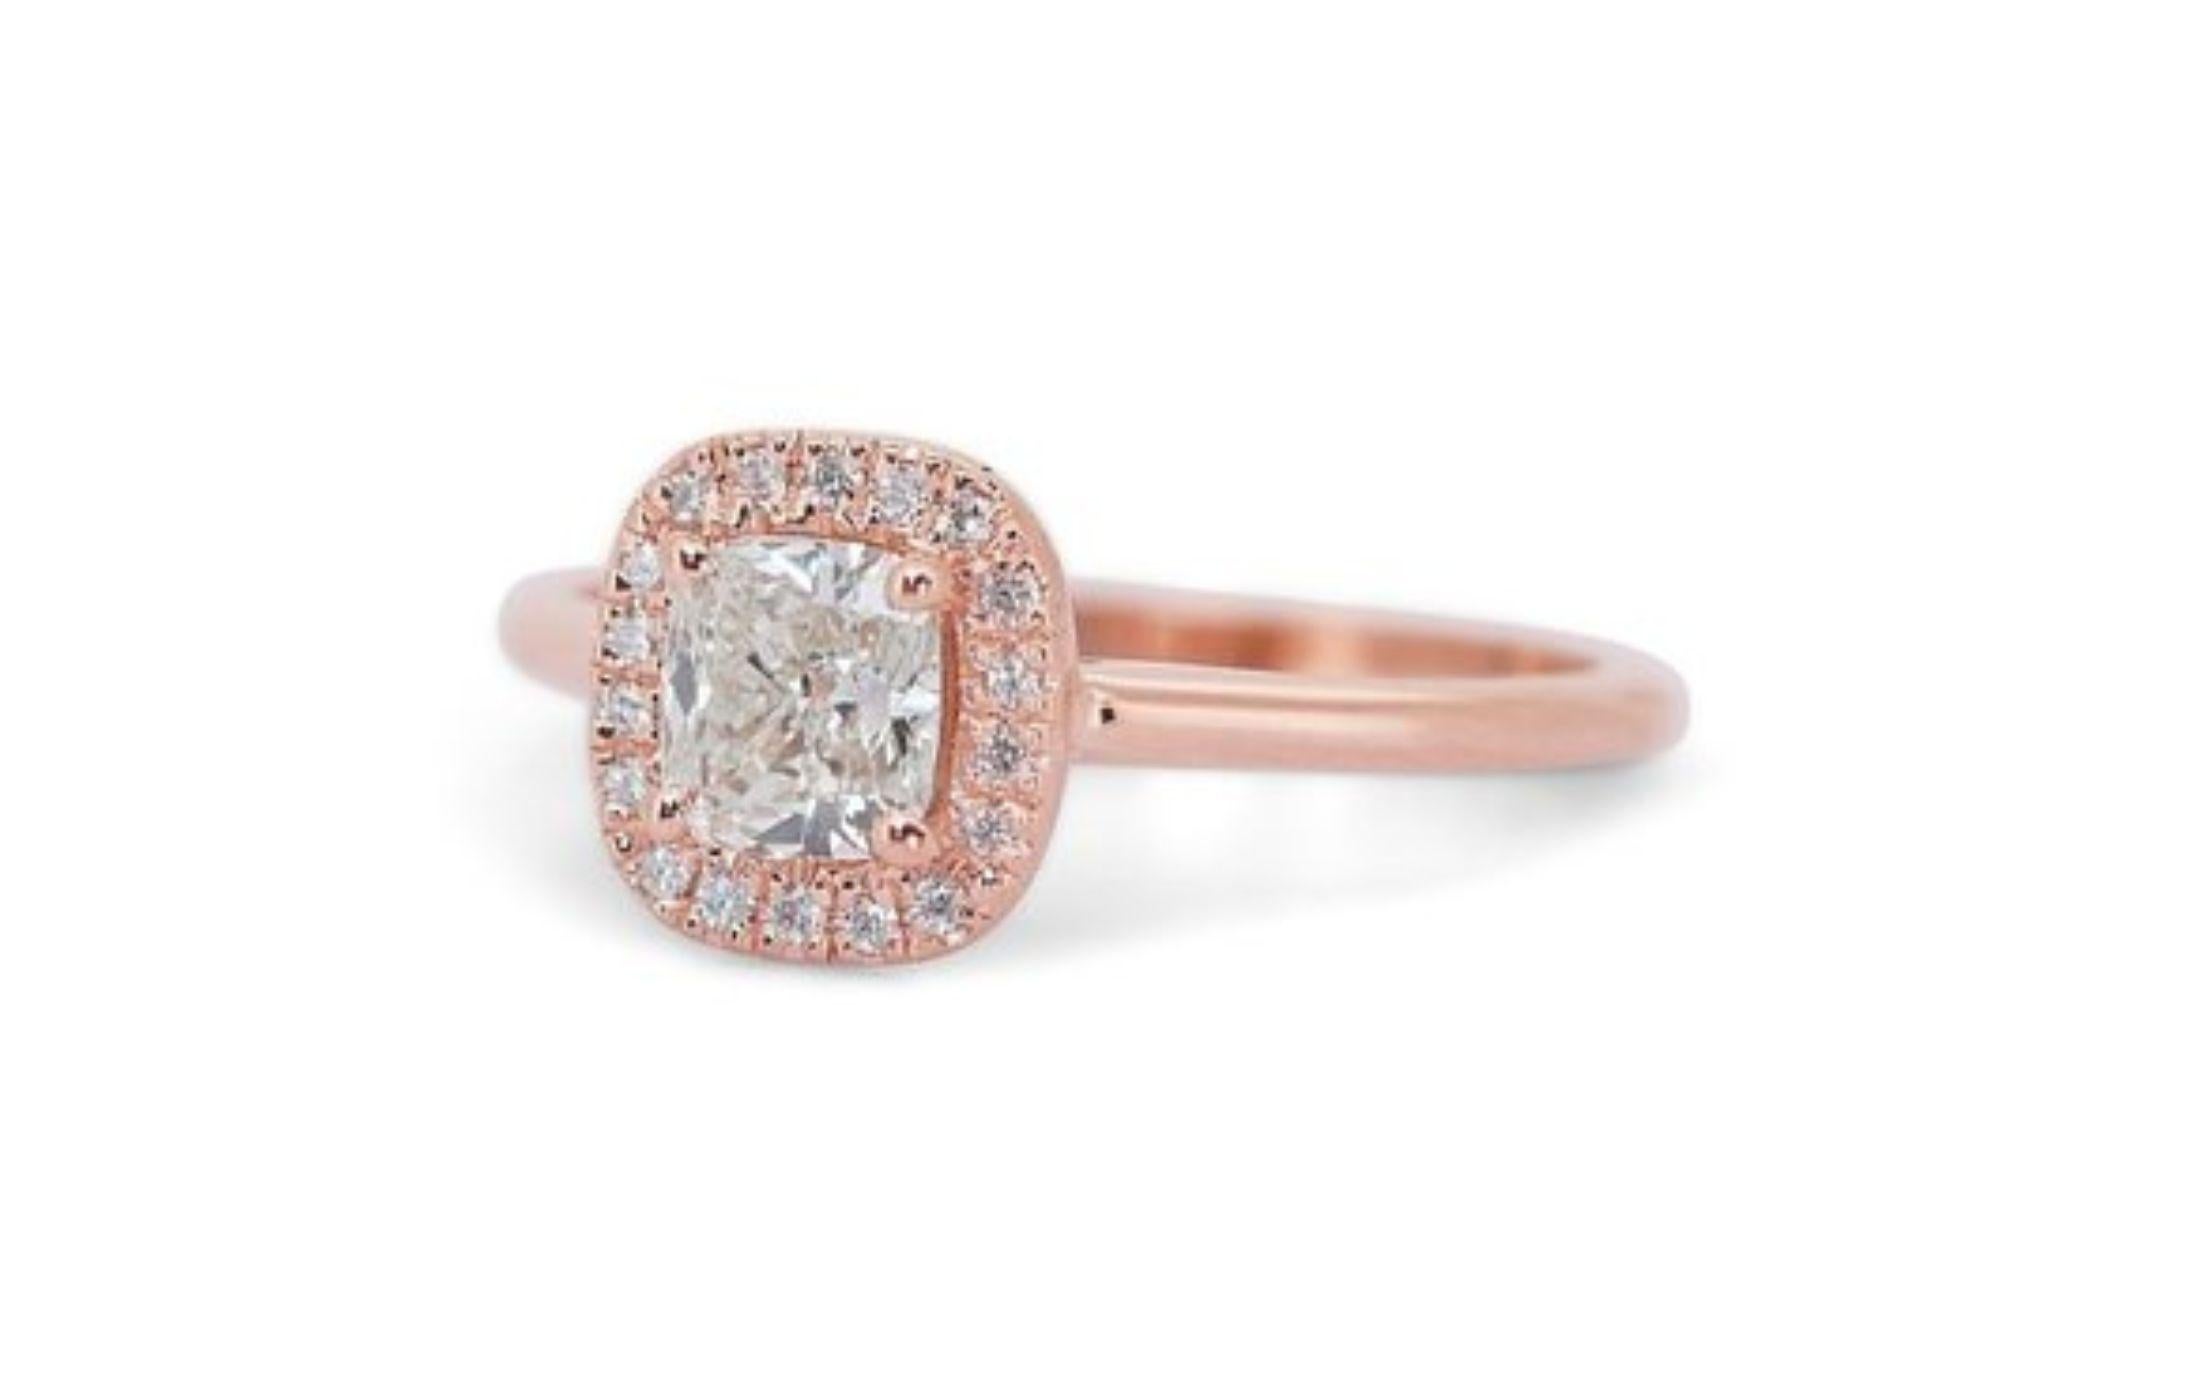 Romantic  1 Carat Cushion Diamond Ring with Dazzling Side Stones in 18K Pink Gol For Sale 4